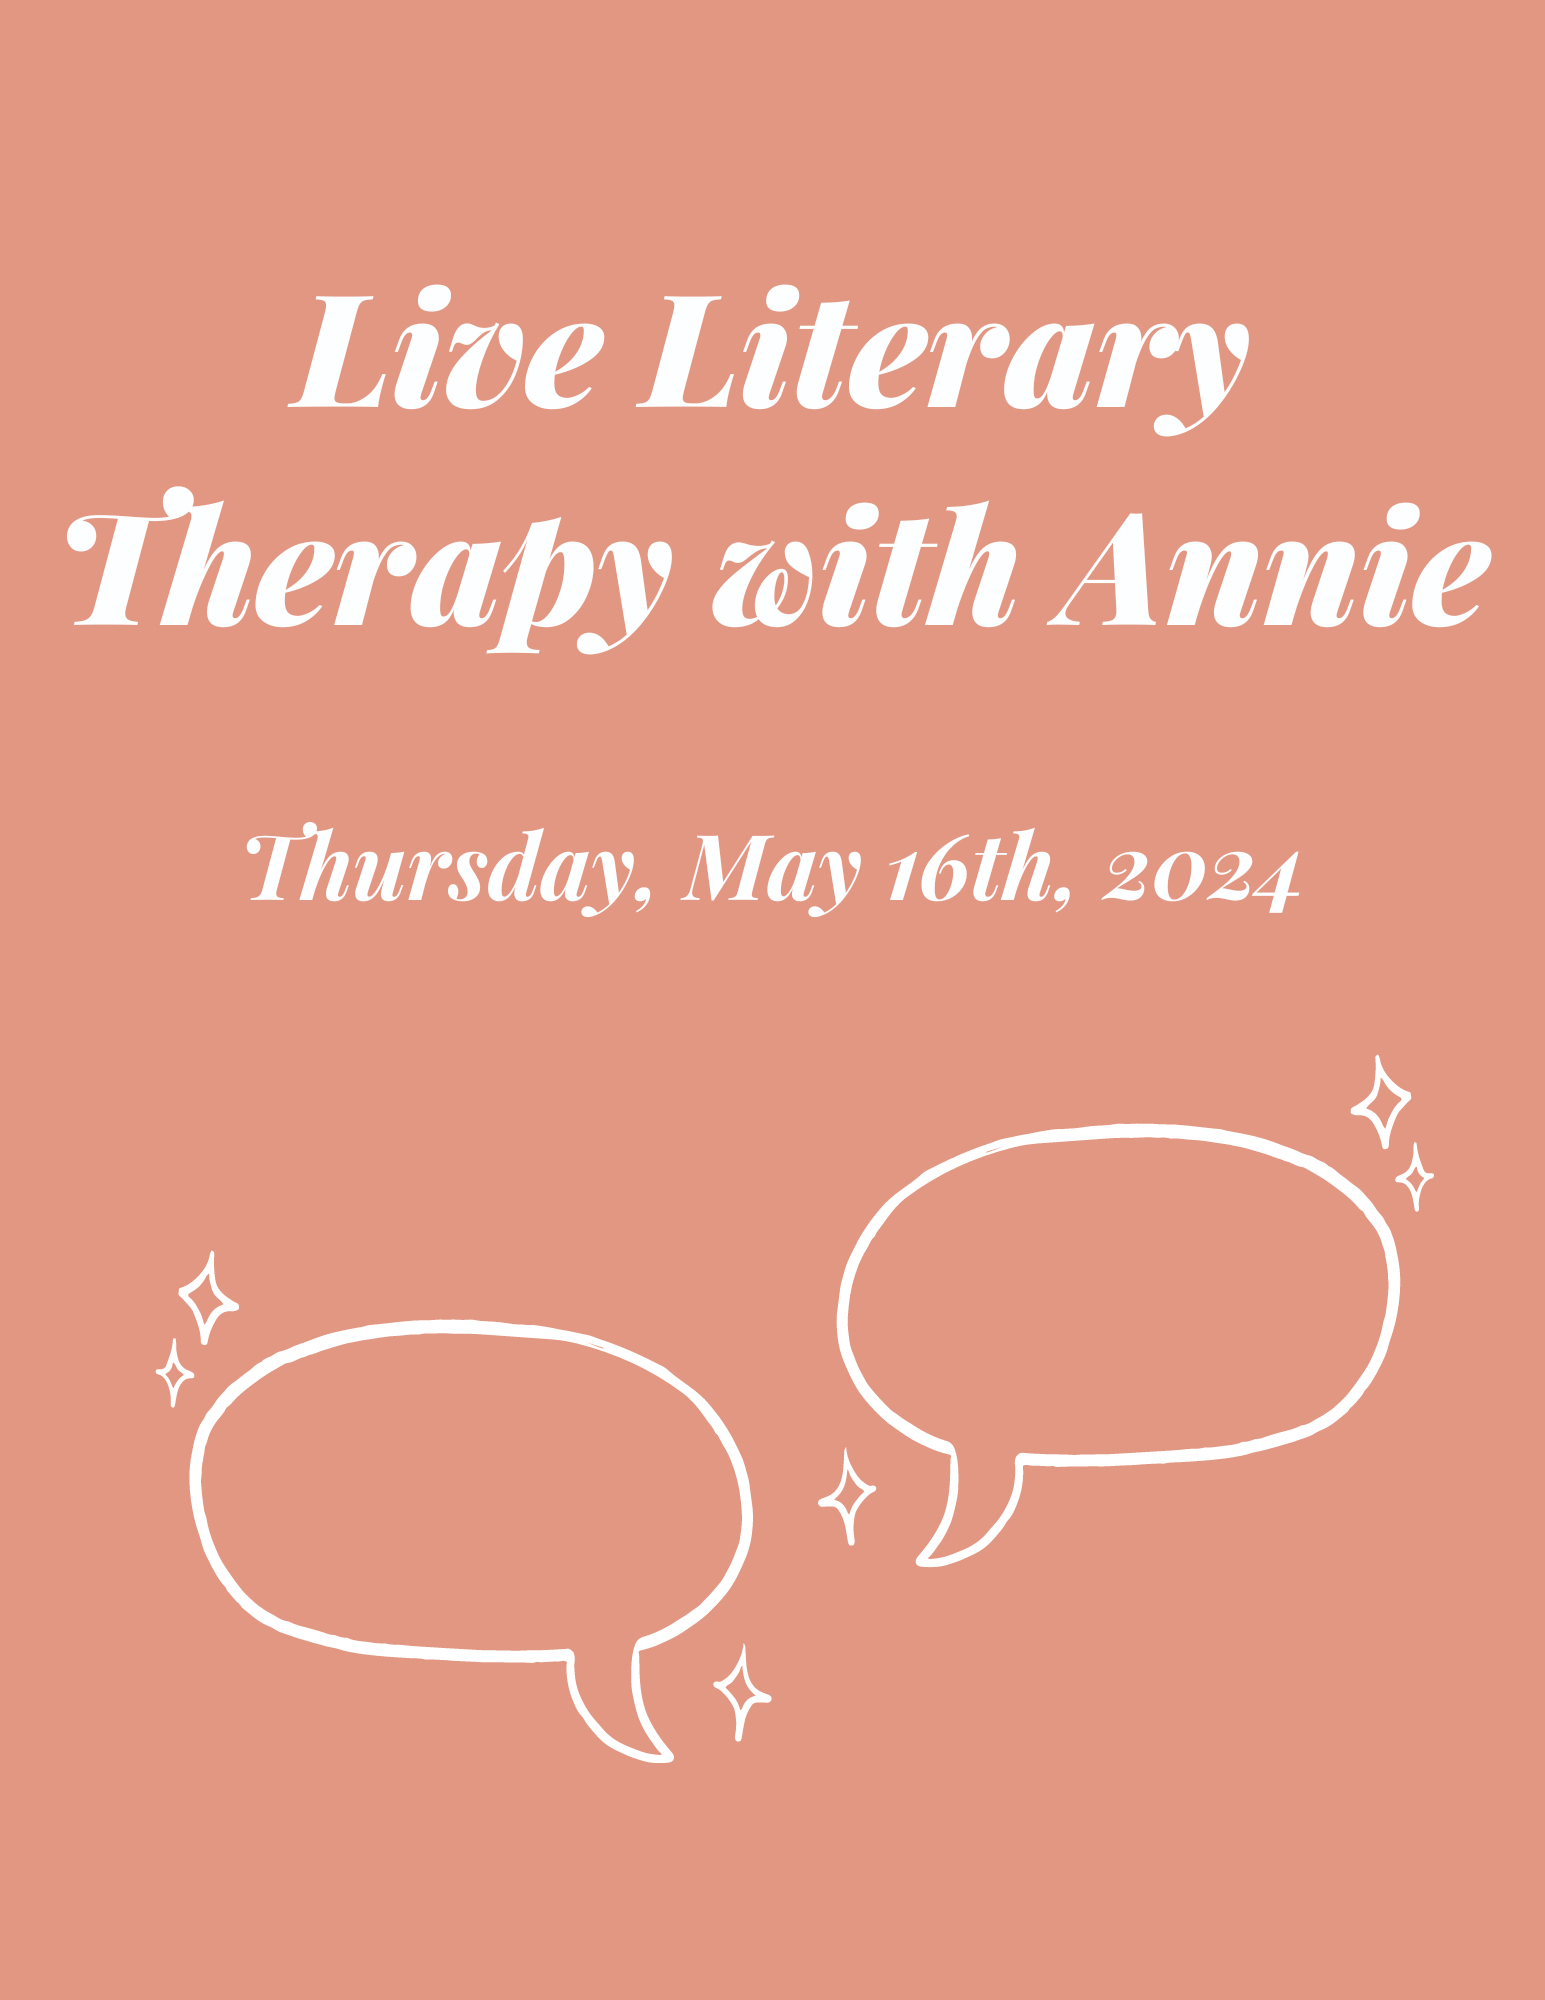 Live Literary Therapy with Annie